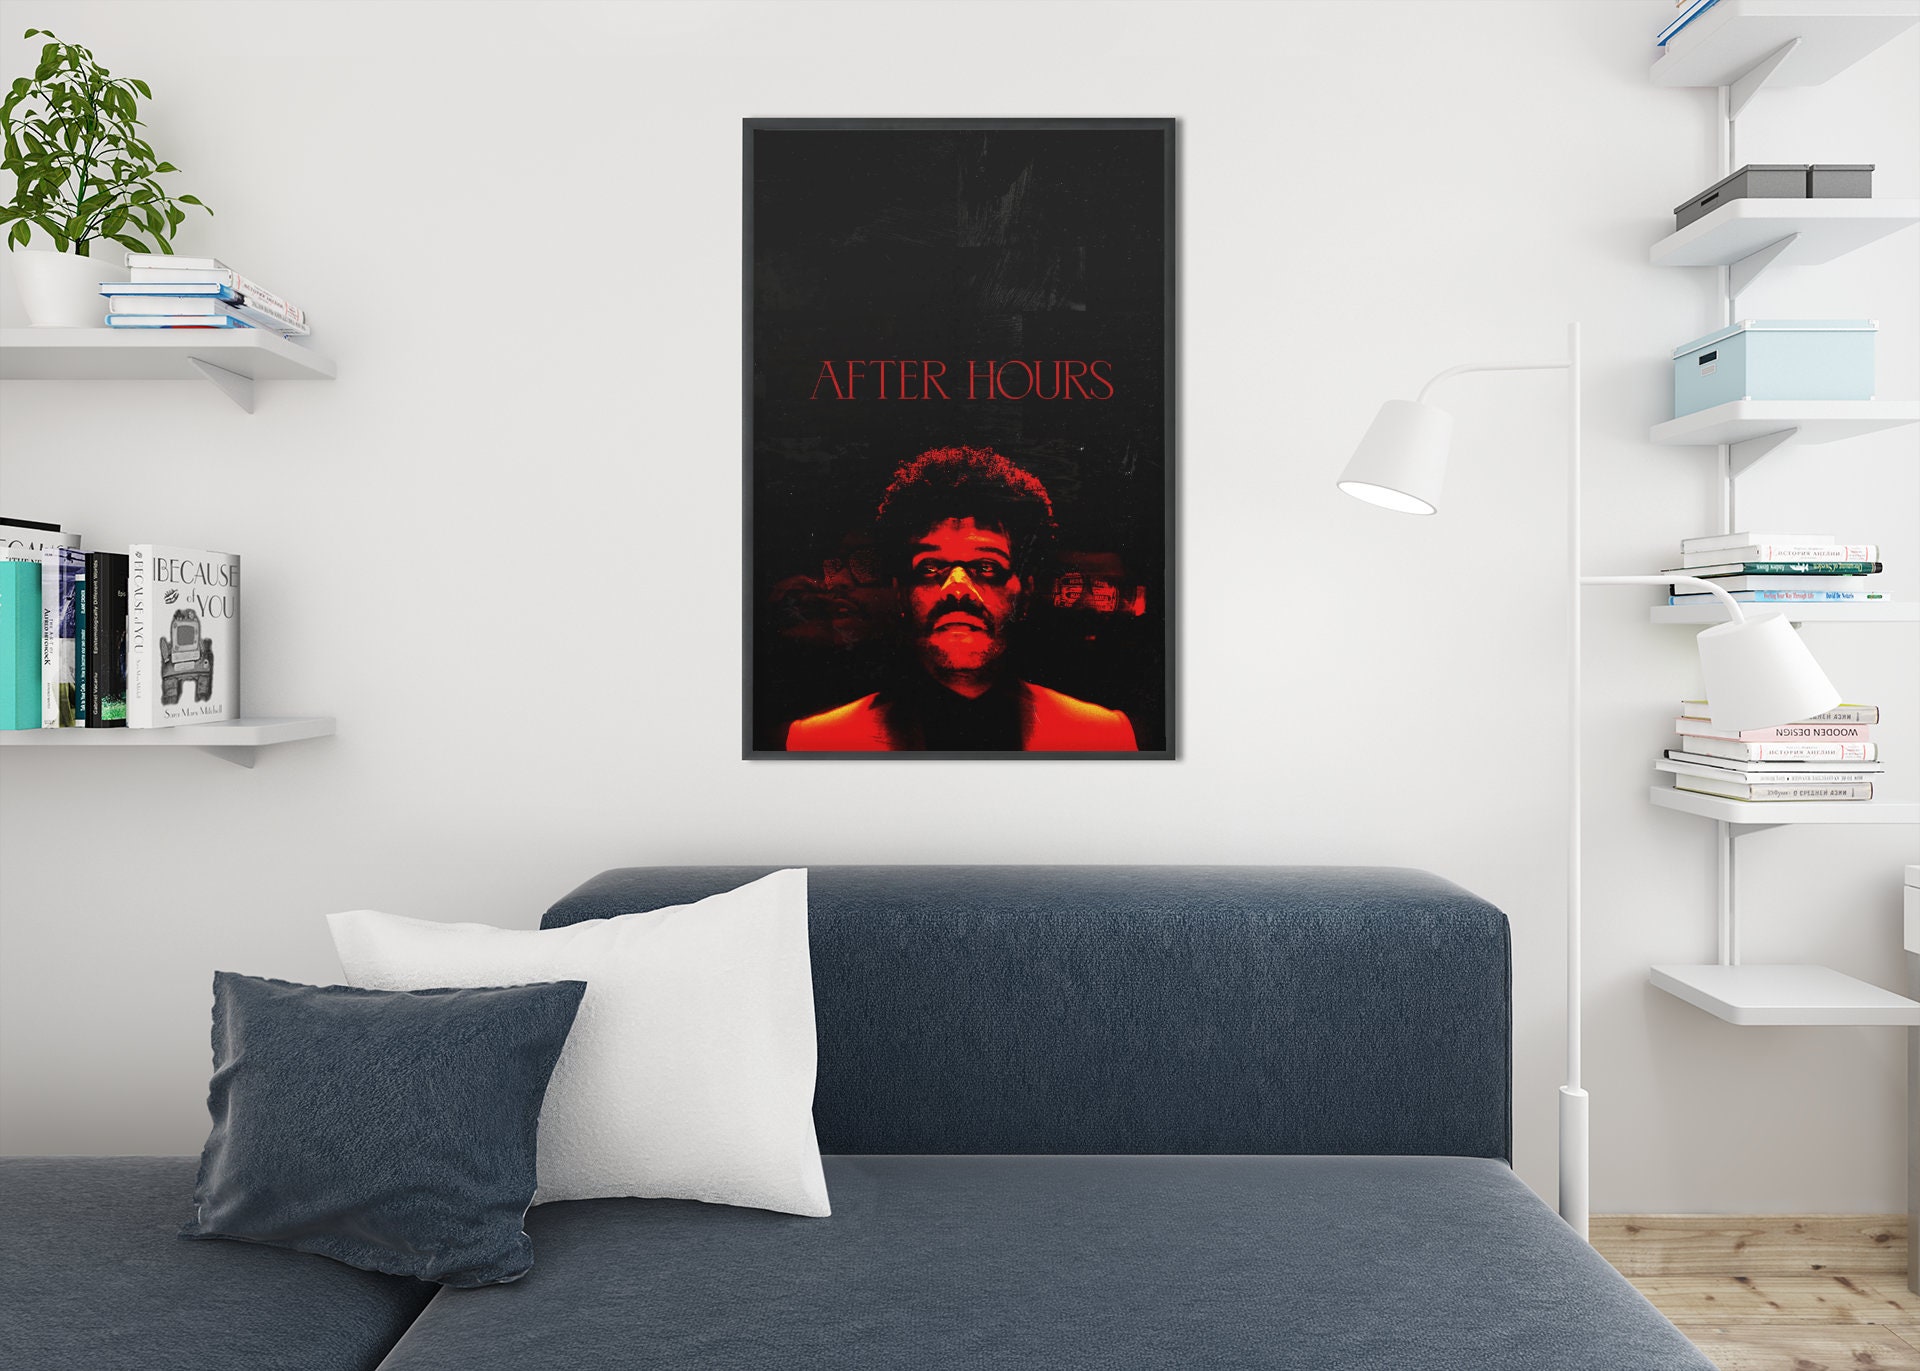 Discover The Weeknd Poster, Vintage Poster, Aesthetic Poster, Vintage Room decor, Gradient Wall Art, Home Decor